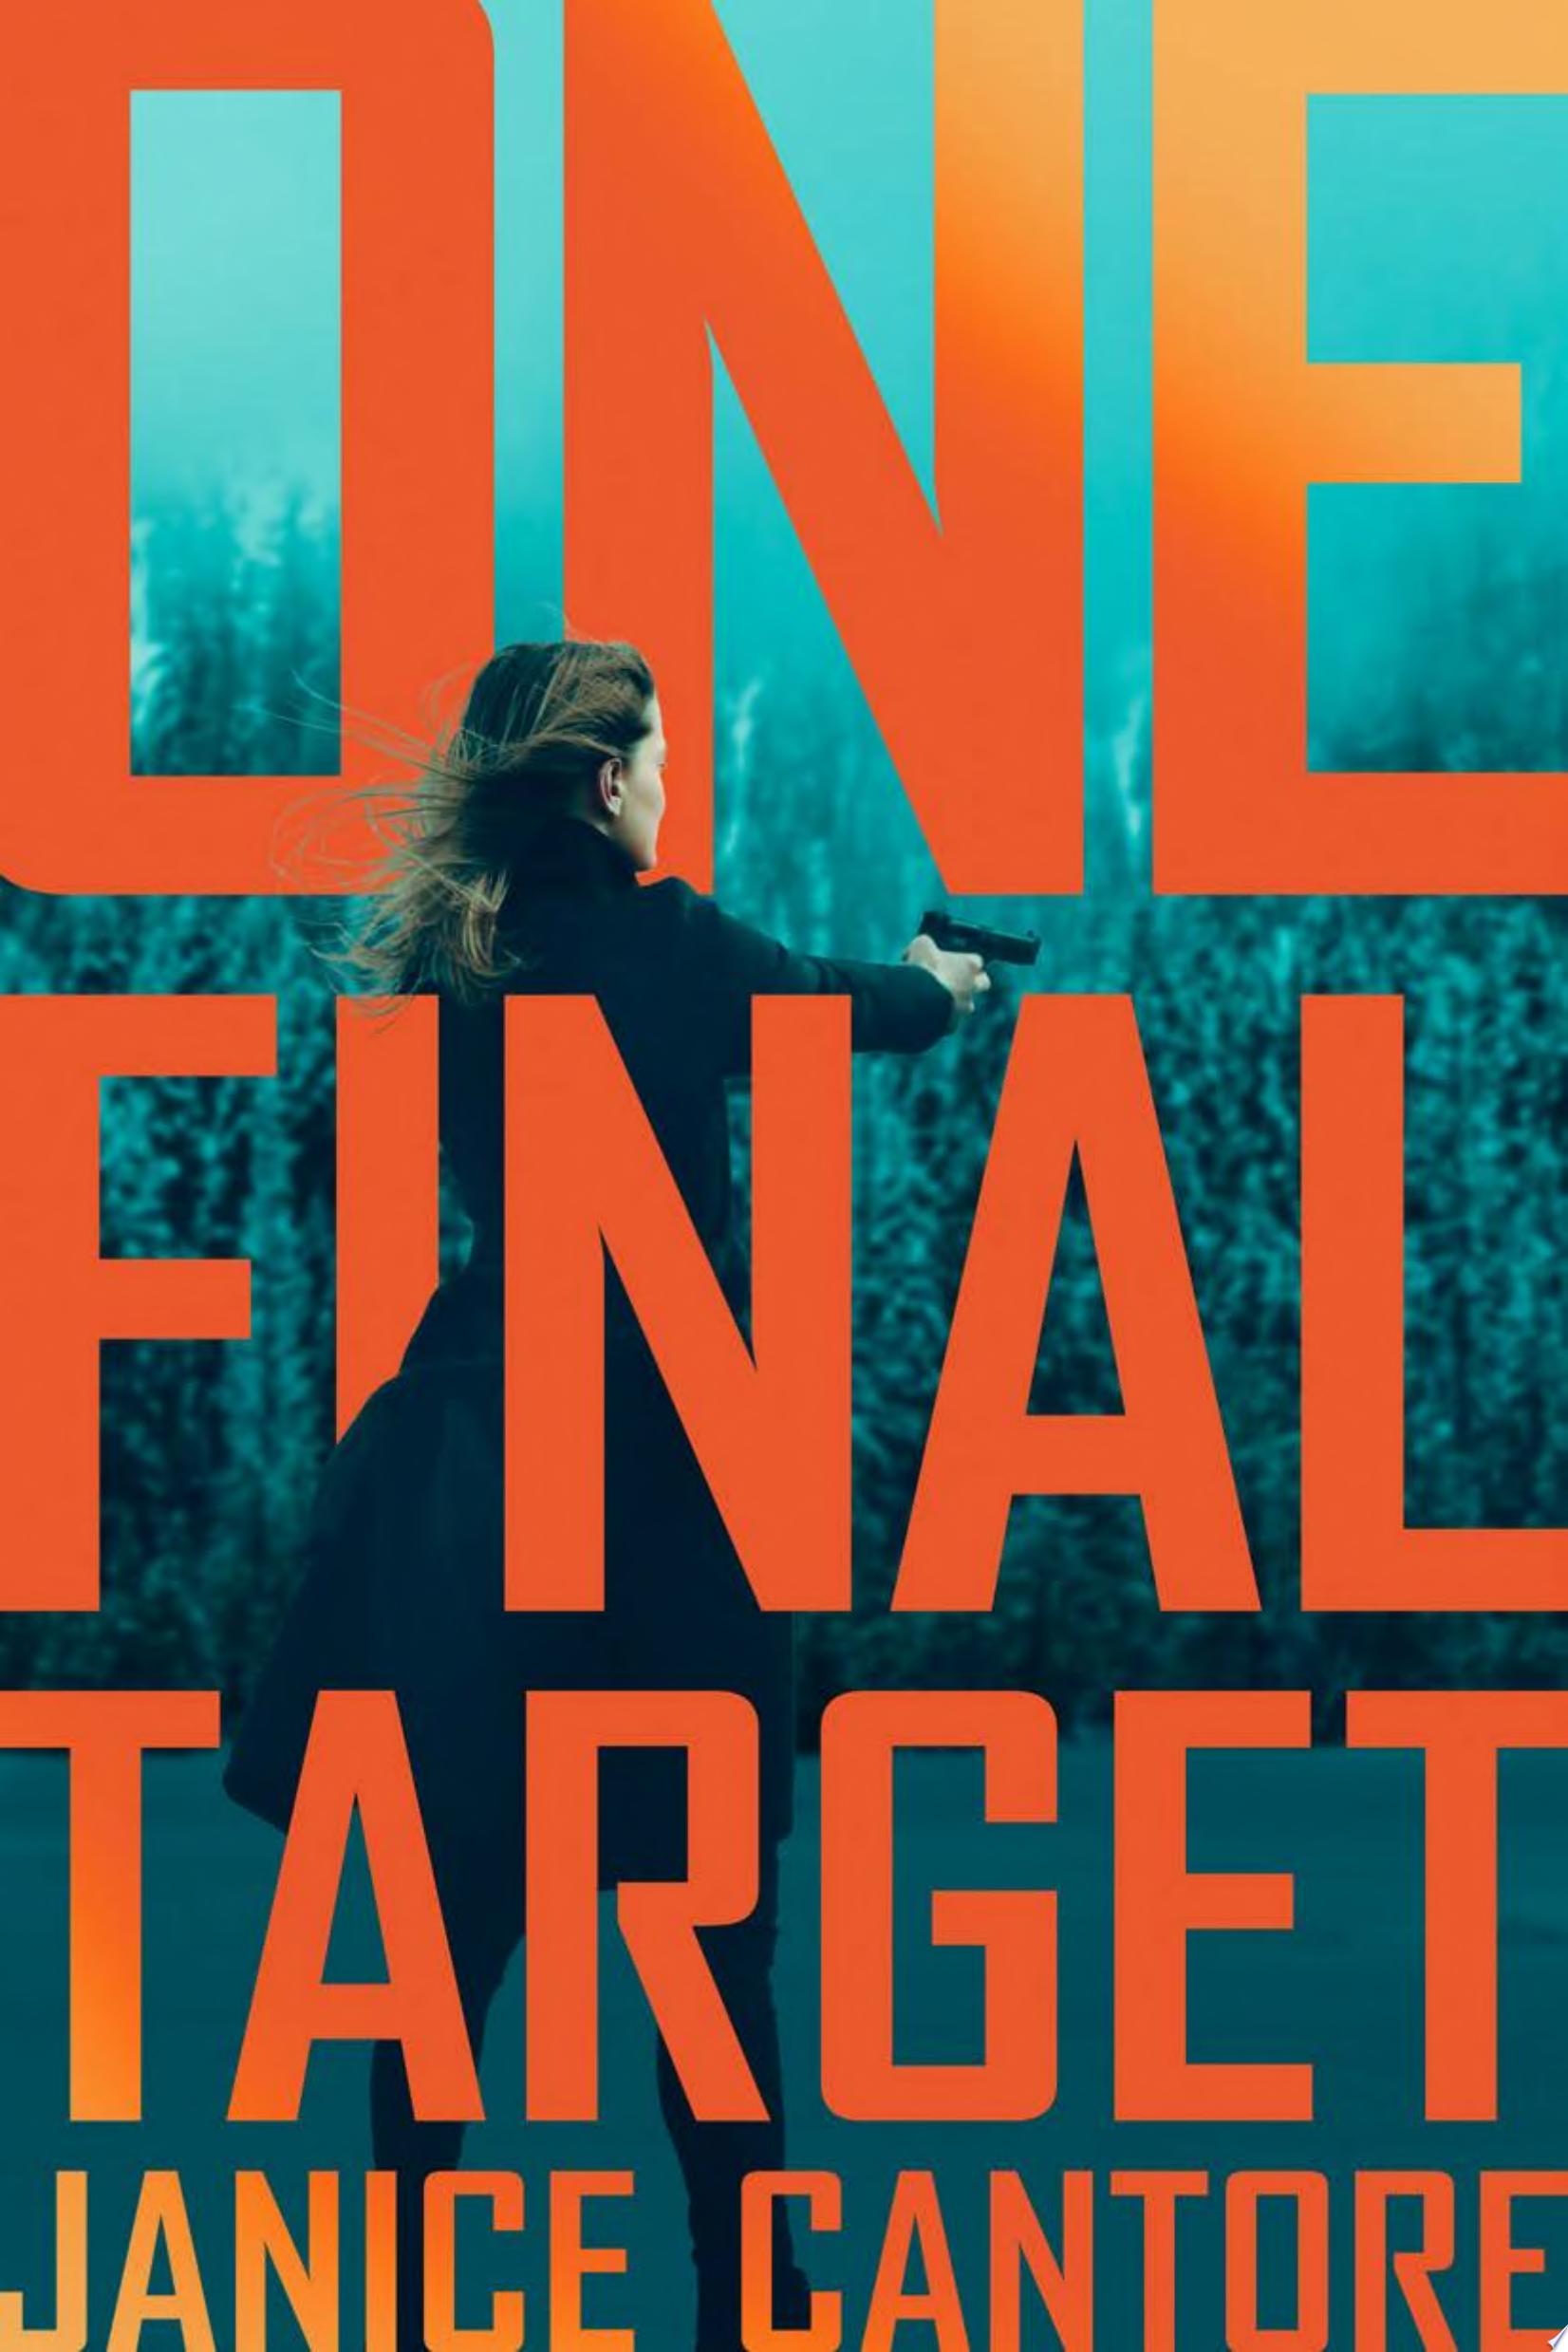 Image for "One Final Target"